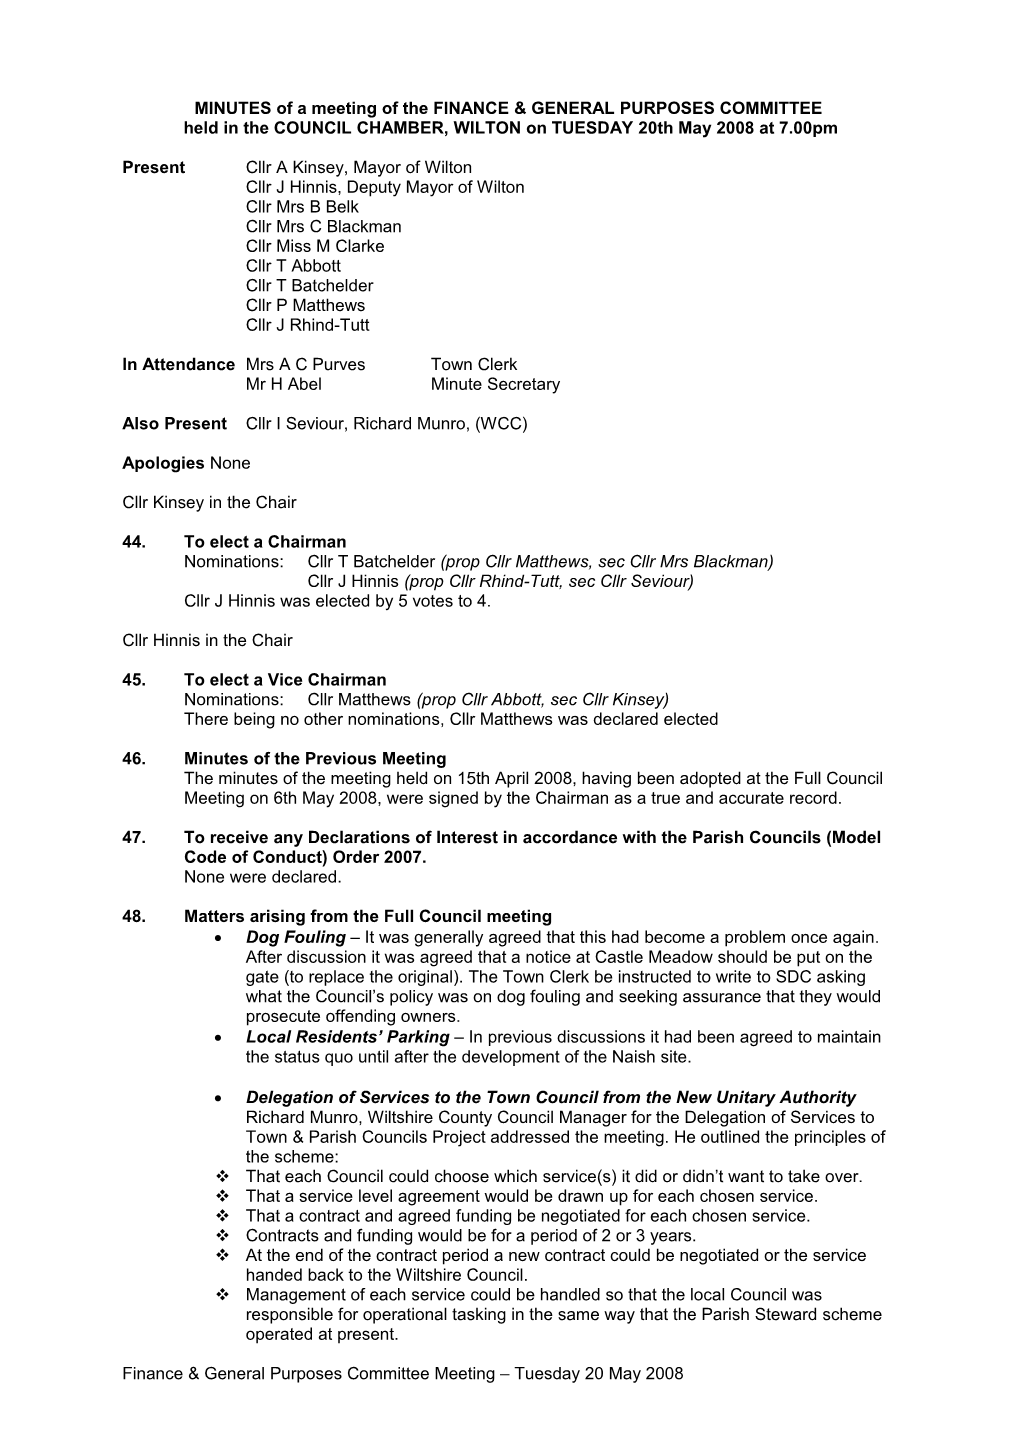 MINUTES of a Meeting of WILTON TOWN COUNCIL Held in the COUNCIL CHAMBERS, KINGSBURY SQUARE s2